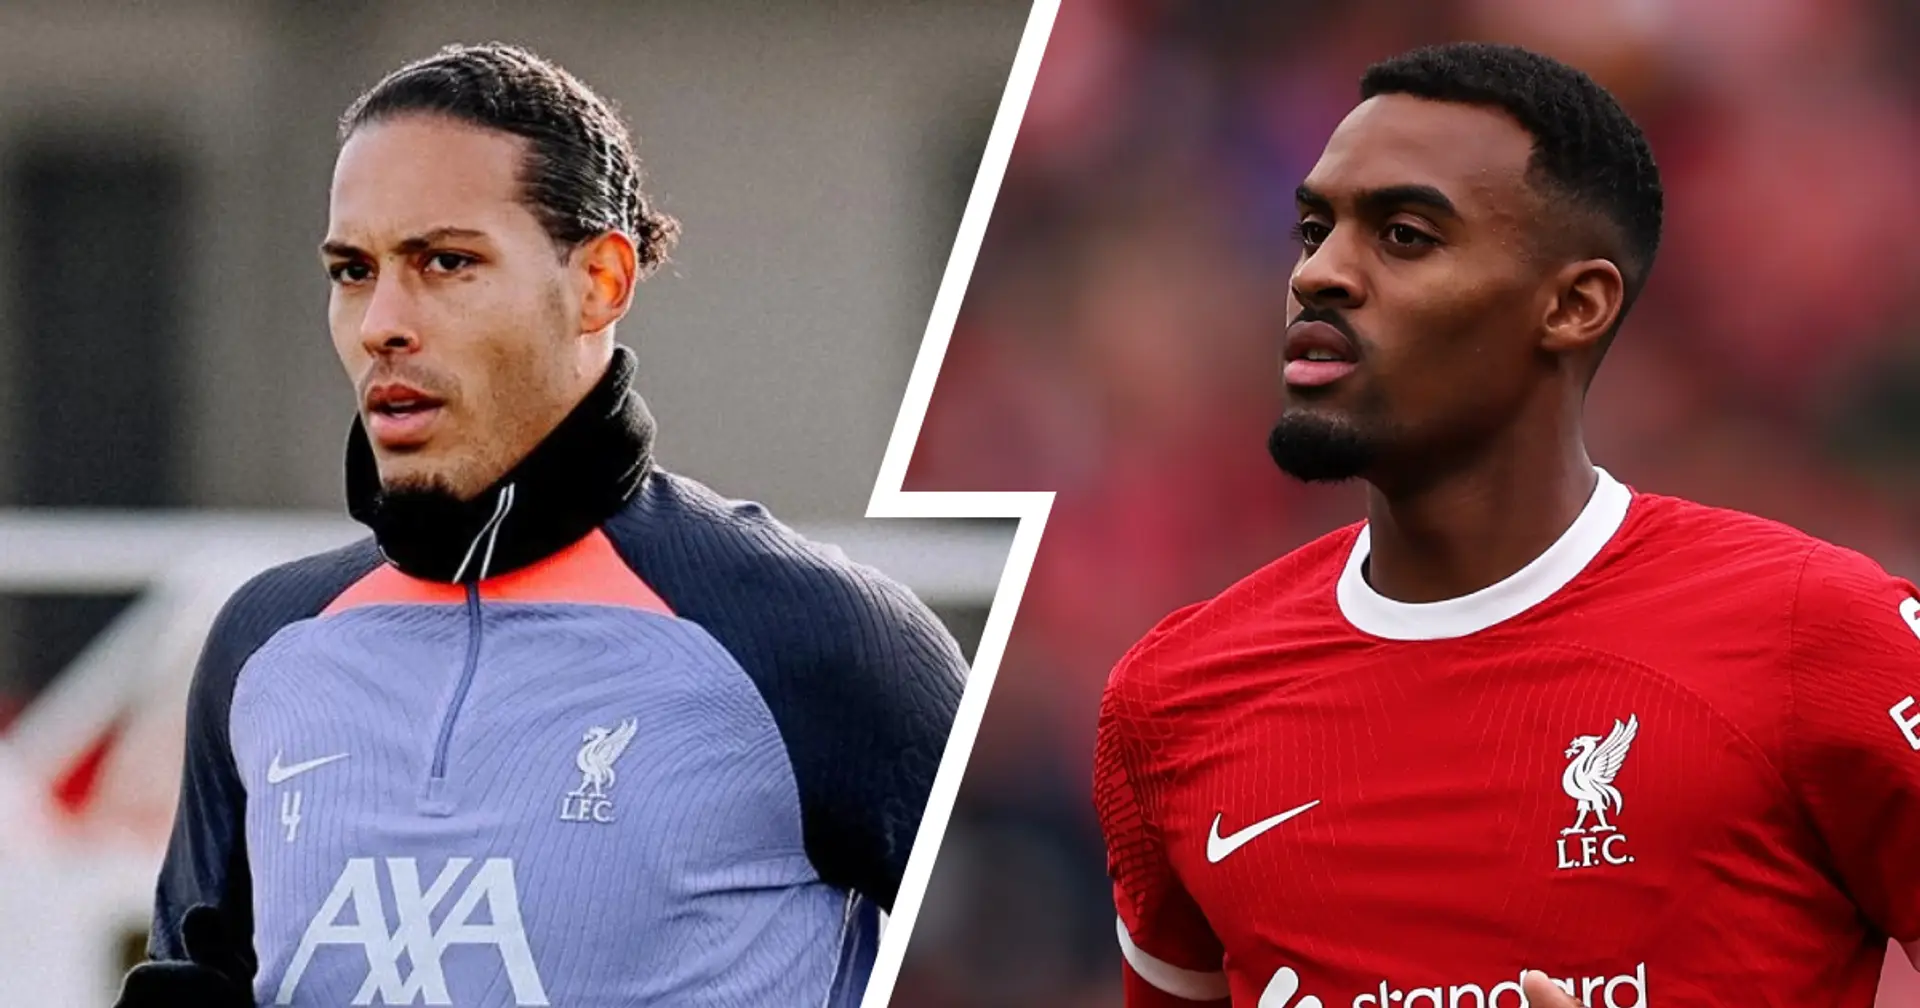 Van Dijk and Gravenberch sidelined from Toulouse game & 2 more big stories you might've missed